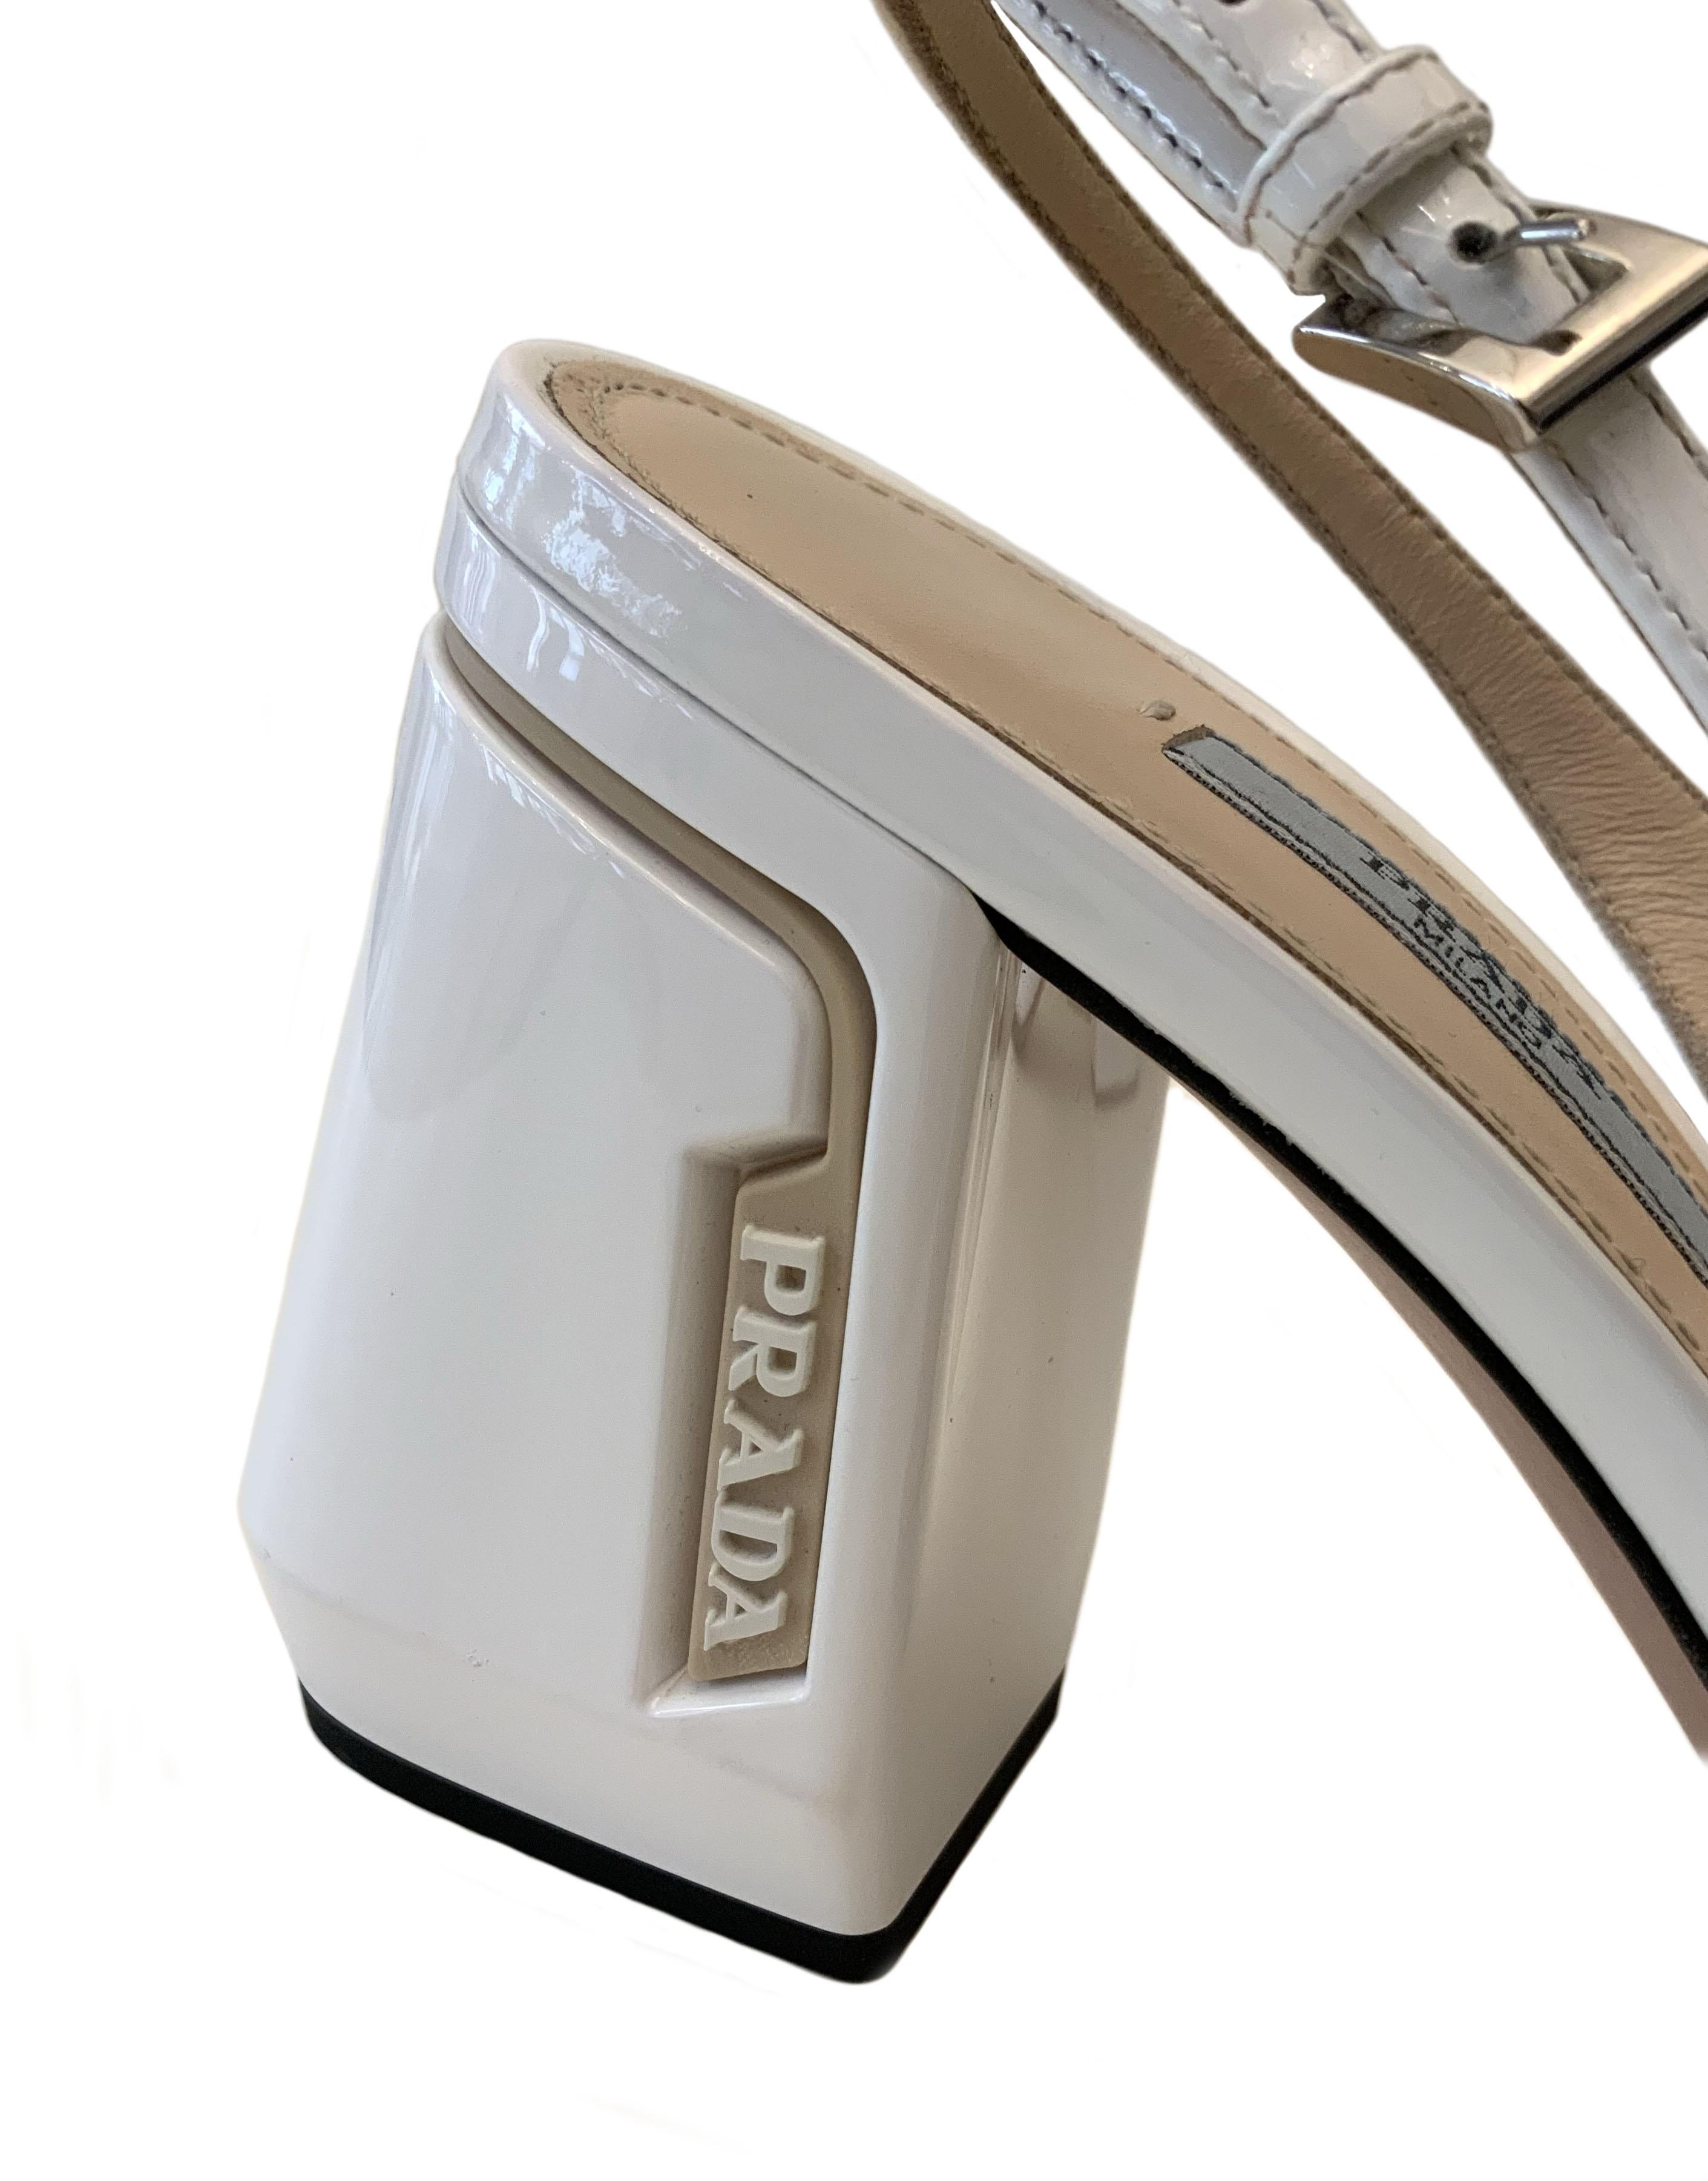 These white and beige patent leather slingback pumps from the house of Prada feature a square toe, a slingback ankle strap, a chunky heel with the embossed logo on the side.

Collection: Spring-Summer 2020
Material: patent leather
Insole and